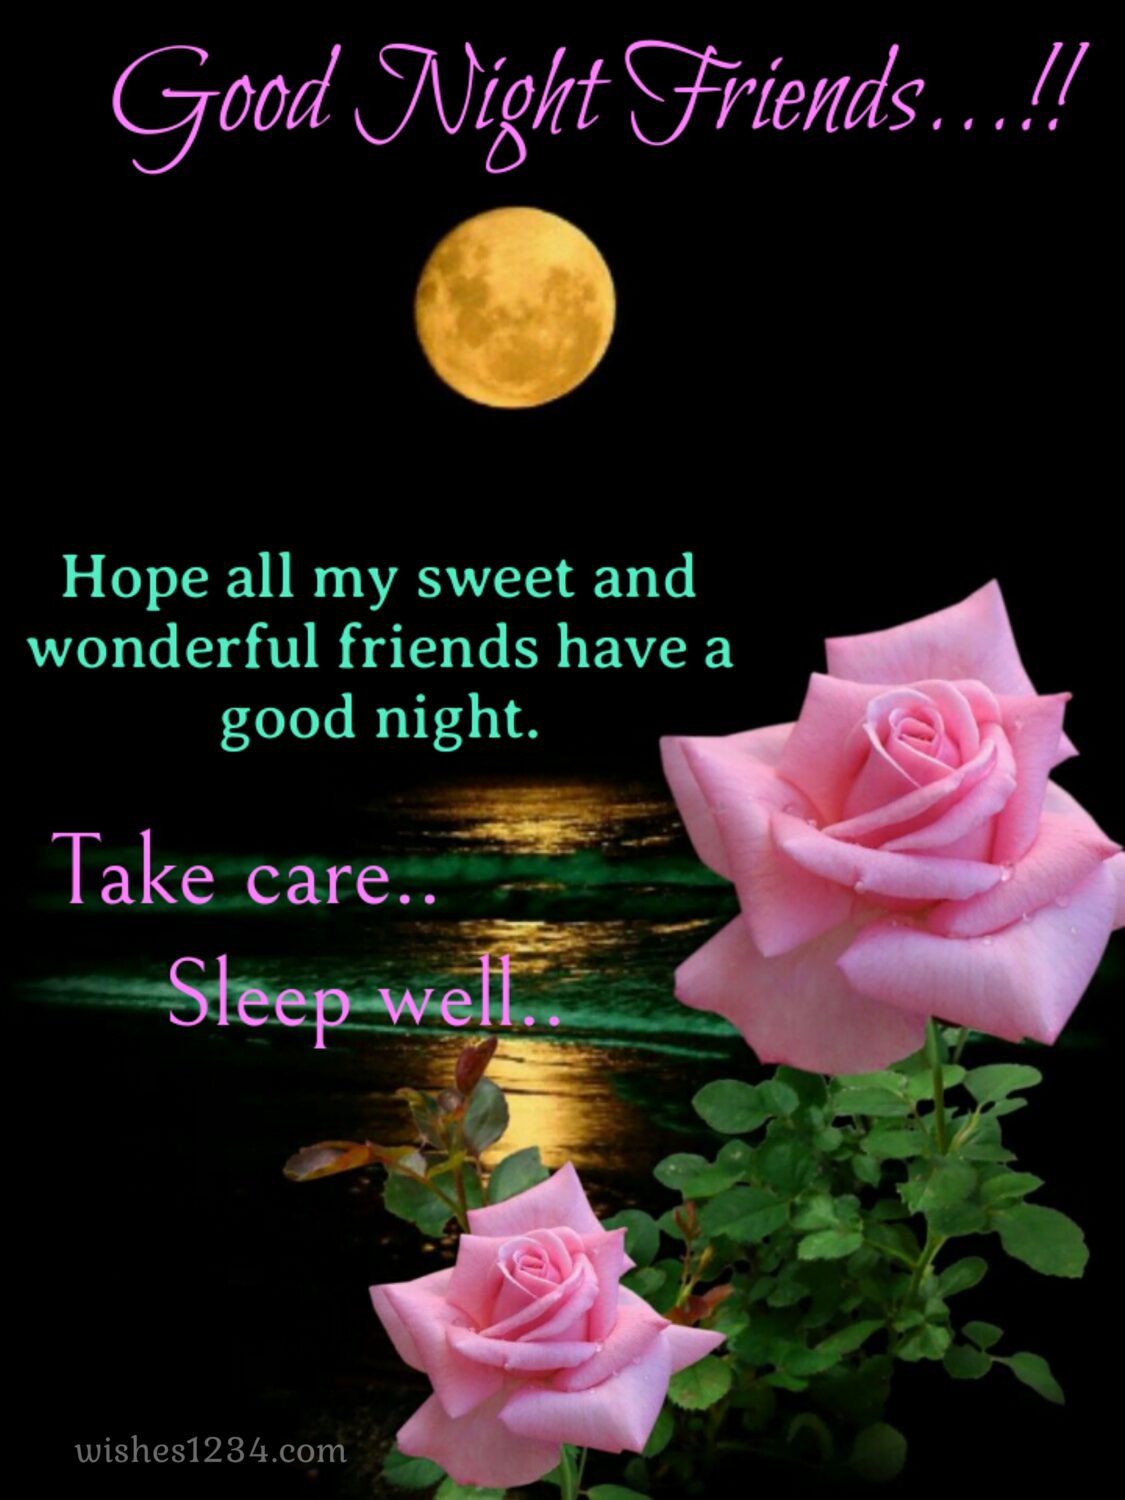 Two rose flowers, Good Night SMS for Friends.